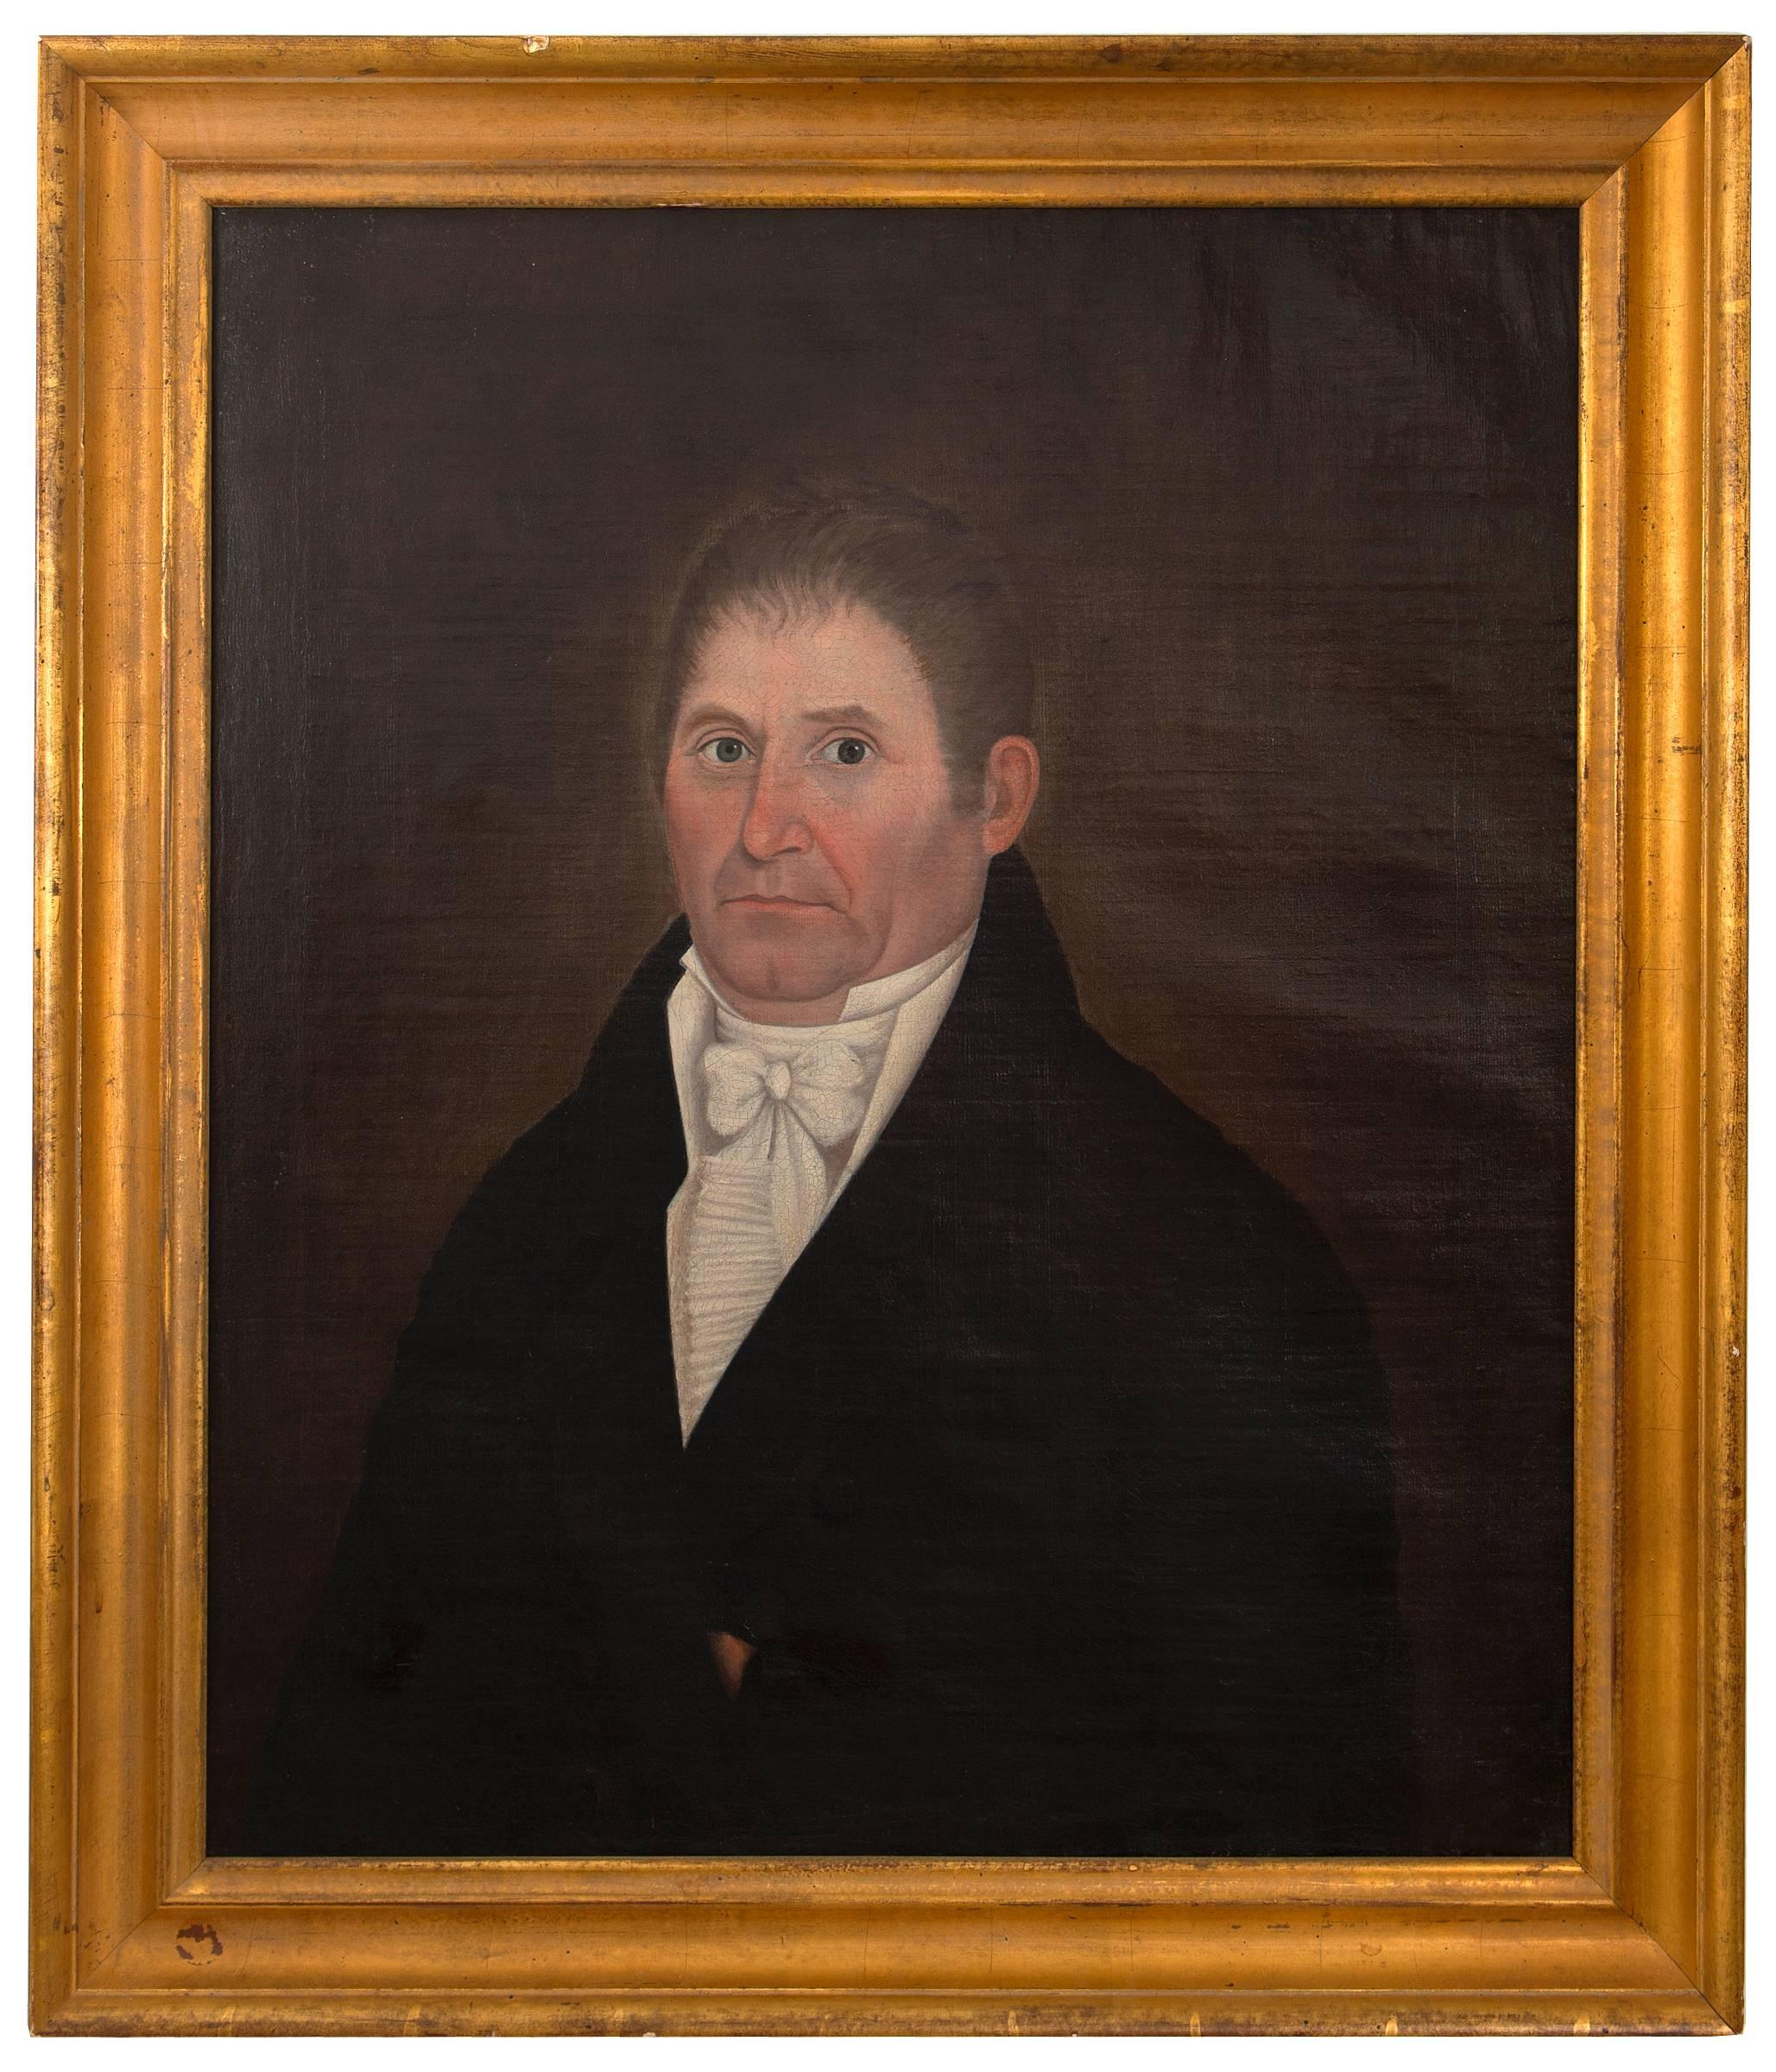 John Brewster -  Folk art Portrait of a Gentleman. Oil on canvas. Fine original condition.
Framed size 35&quot; x 30&quot;.

John Brewster Jr. (May 30 or May 31, 1766 – August 13, 1854)[1] was a prolific, deaf itinerant painter who produced many